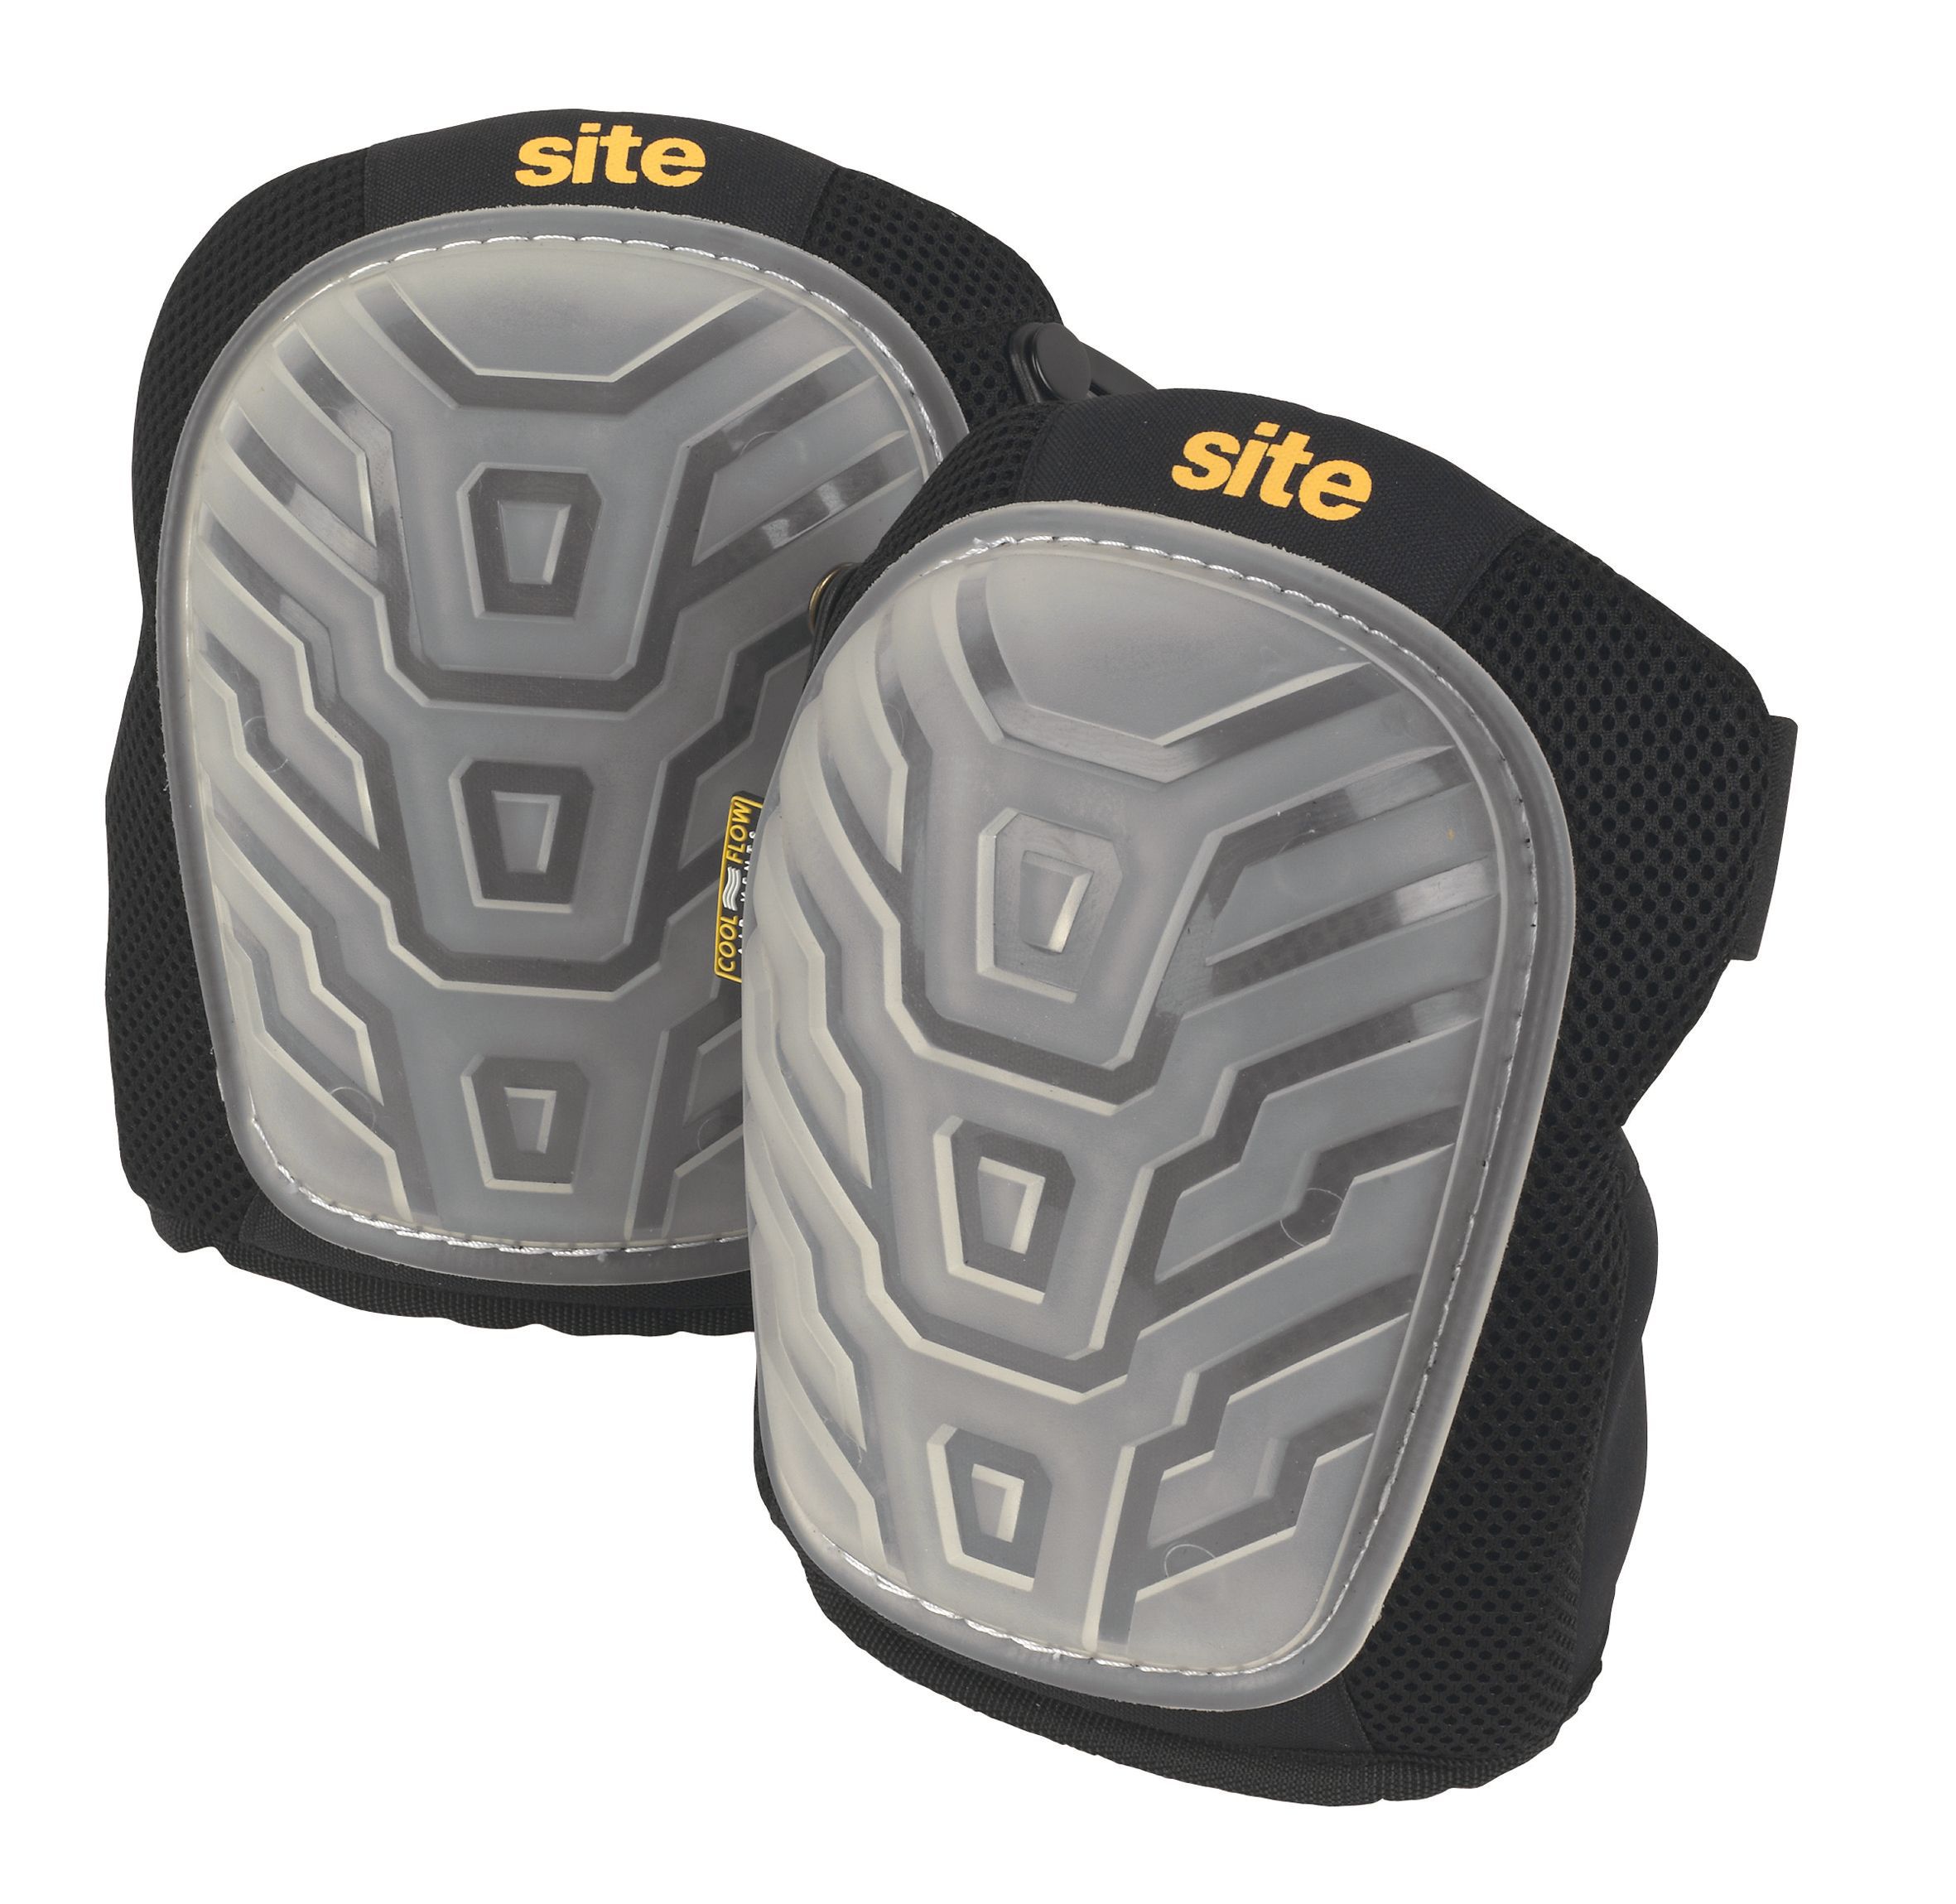 Site 29639564 One size Knee pads | Departments | DIY at B&Q